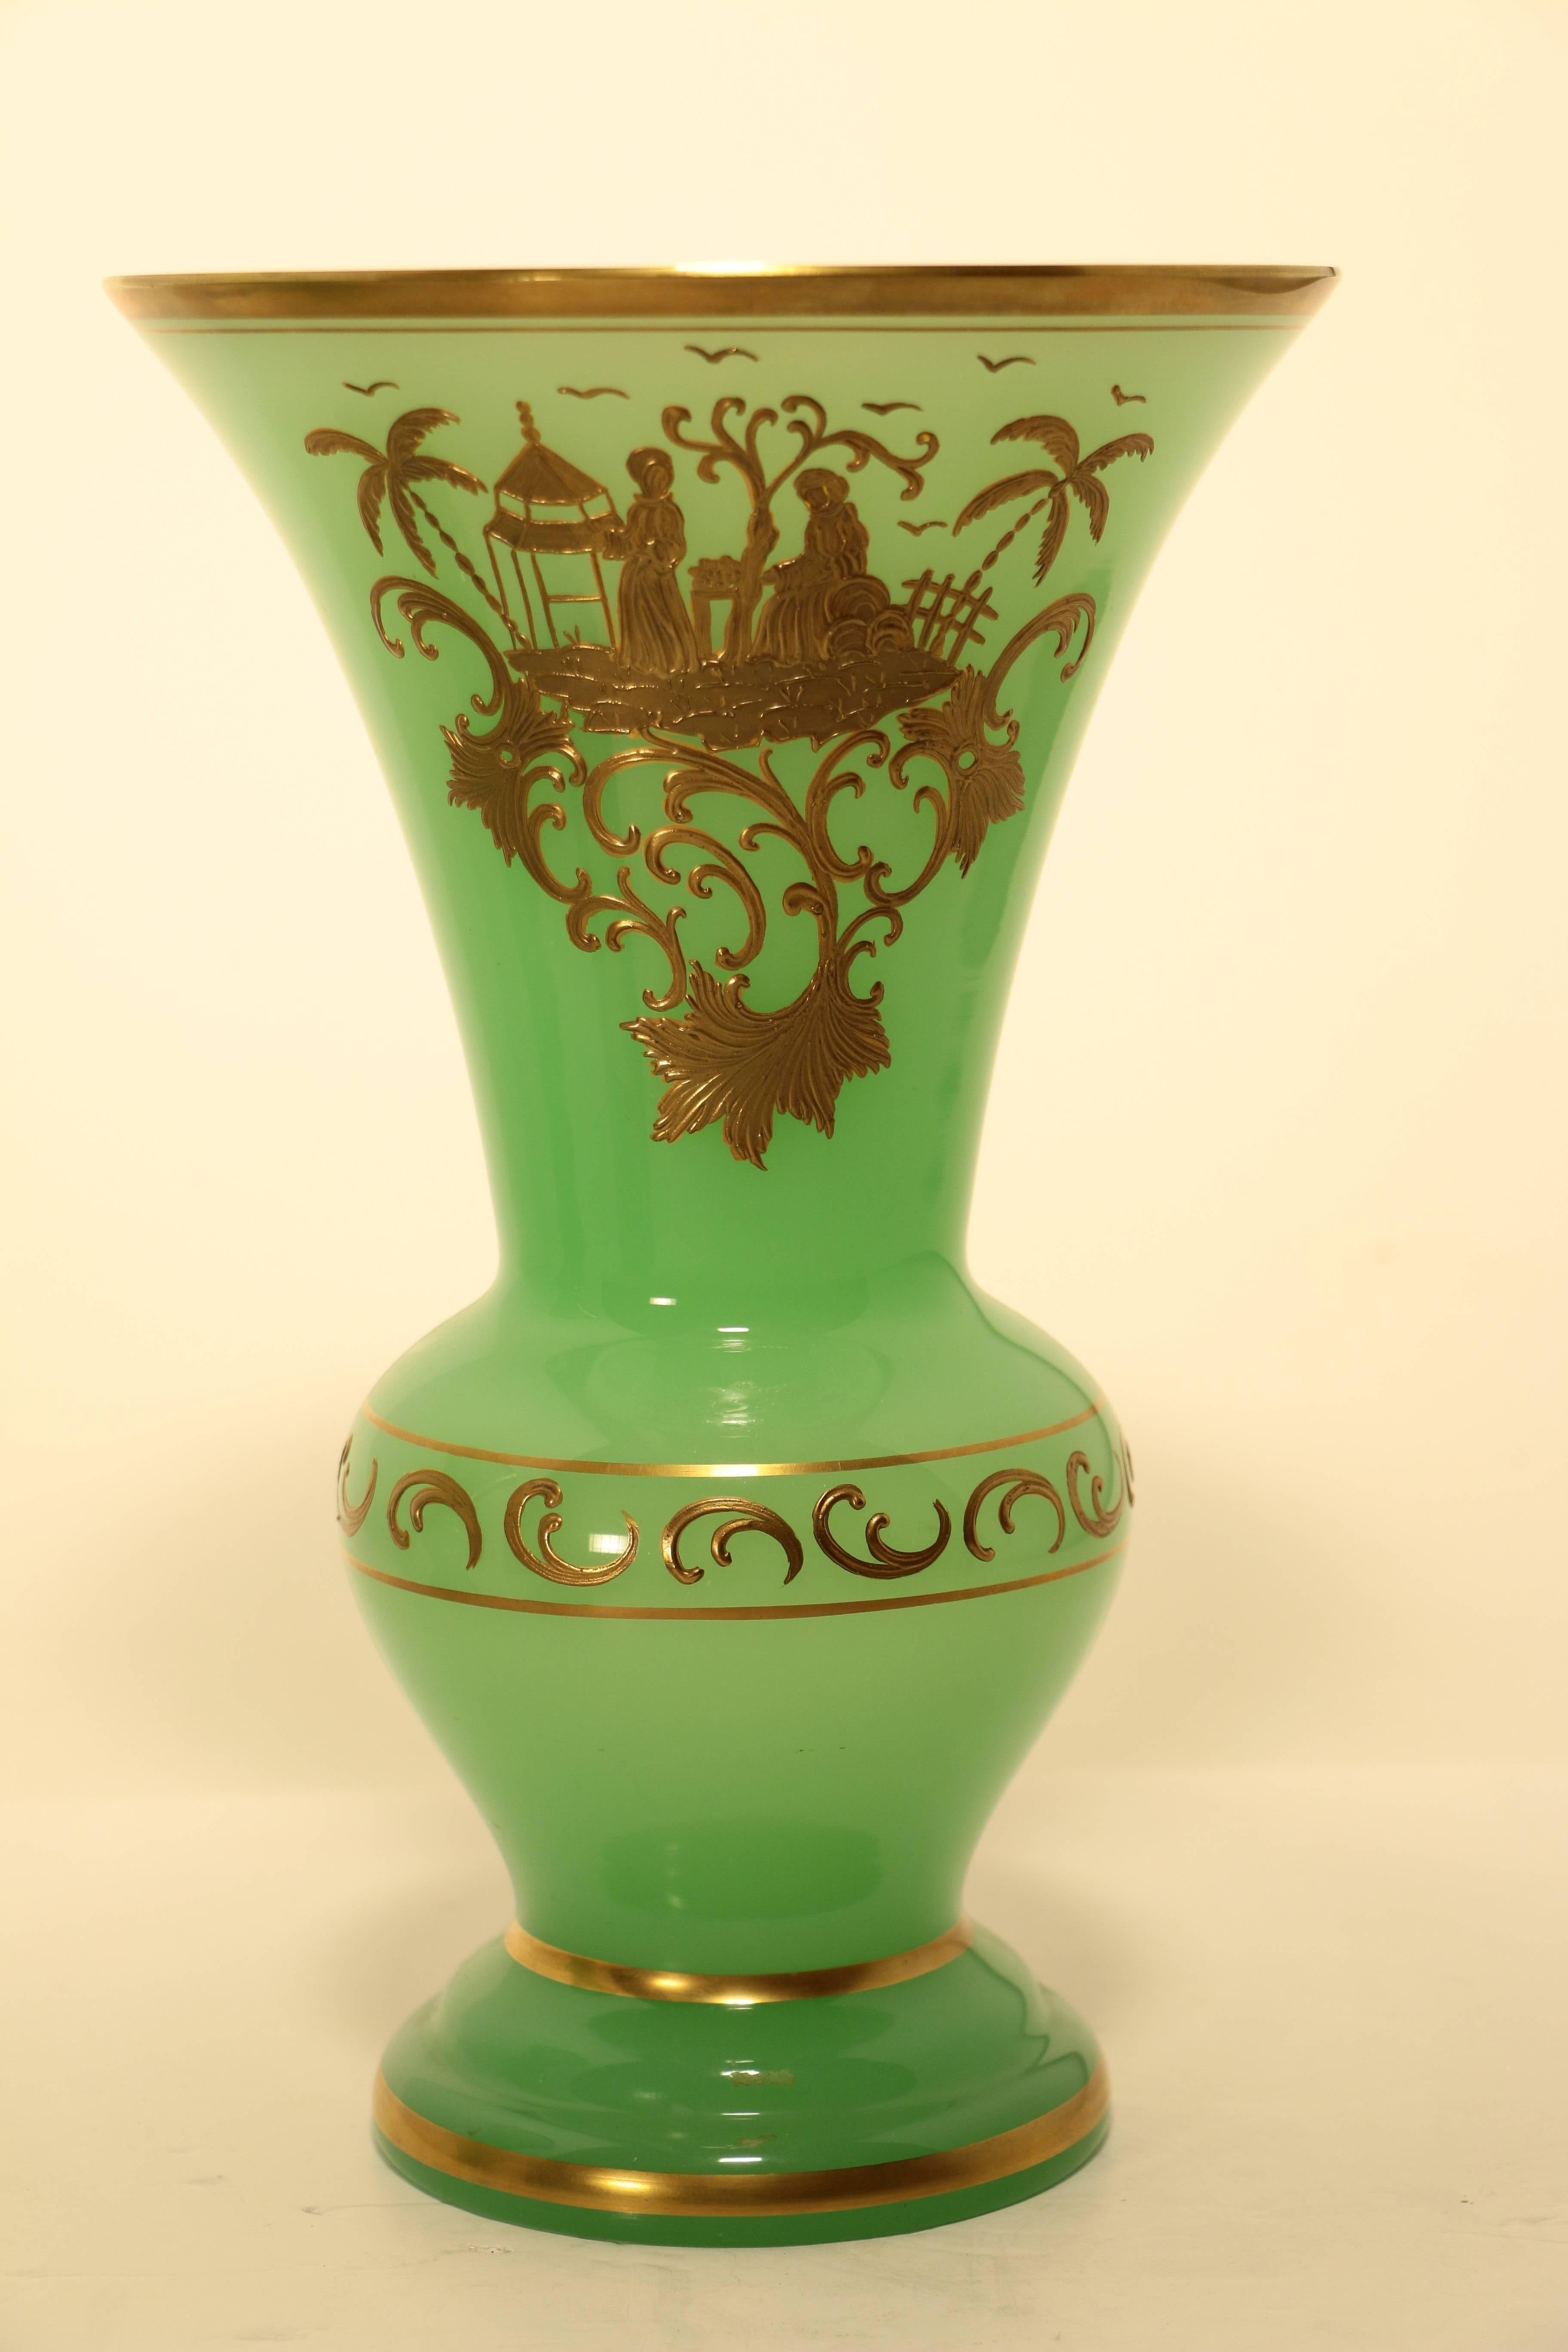 Pair of French Baccarat Chrysoprase (Uranium) Green Opaline Art Glass vases, circa 1845-1865. 

We have these from a private collection, assembled in Swtizerland probably in the 1920s. Each vase with baluster stem and flared rim is applied with